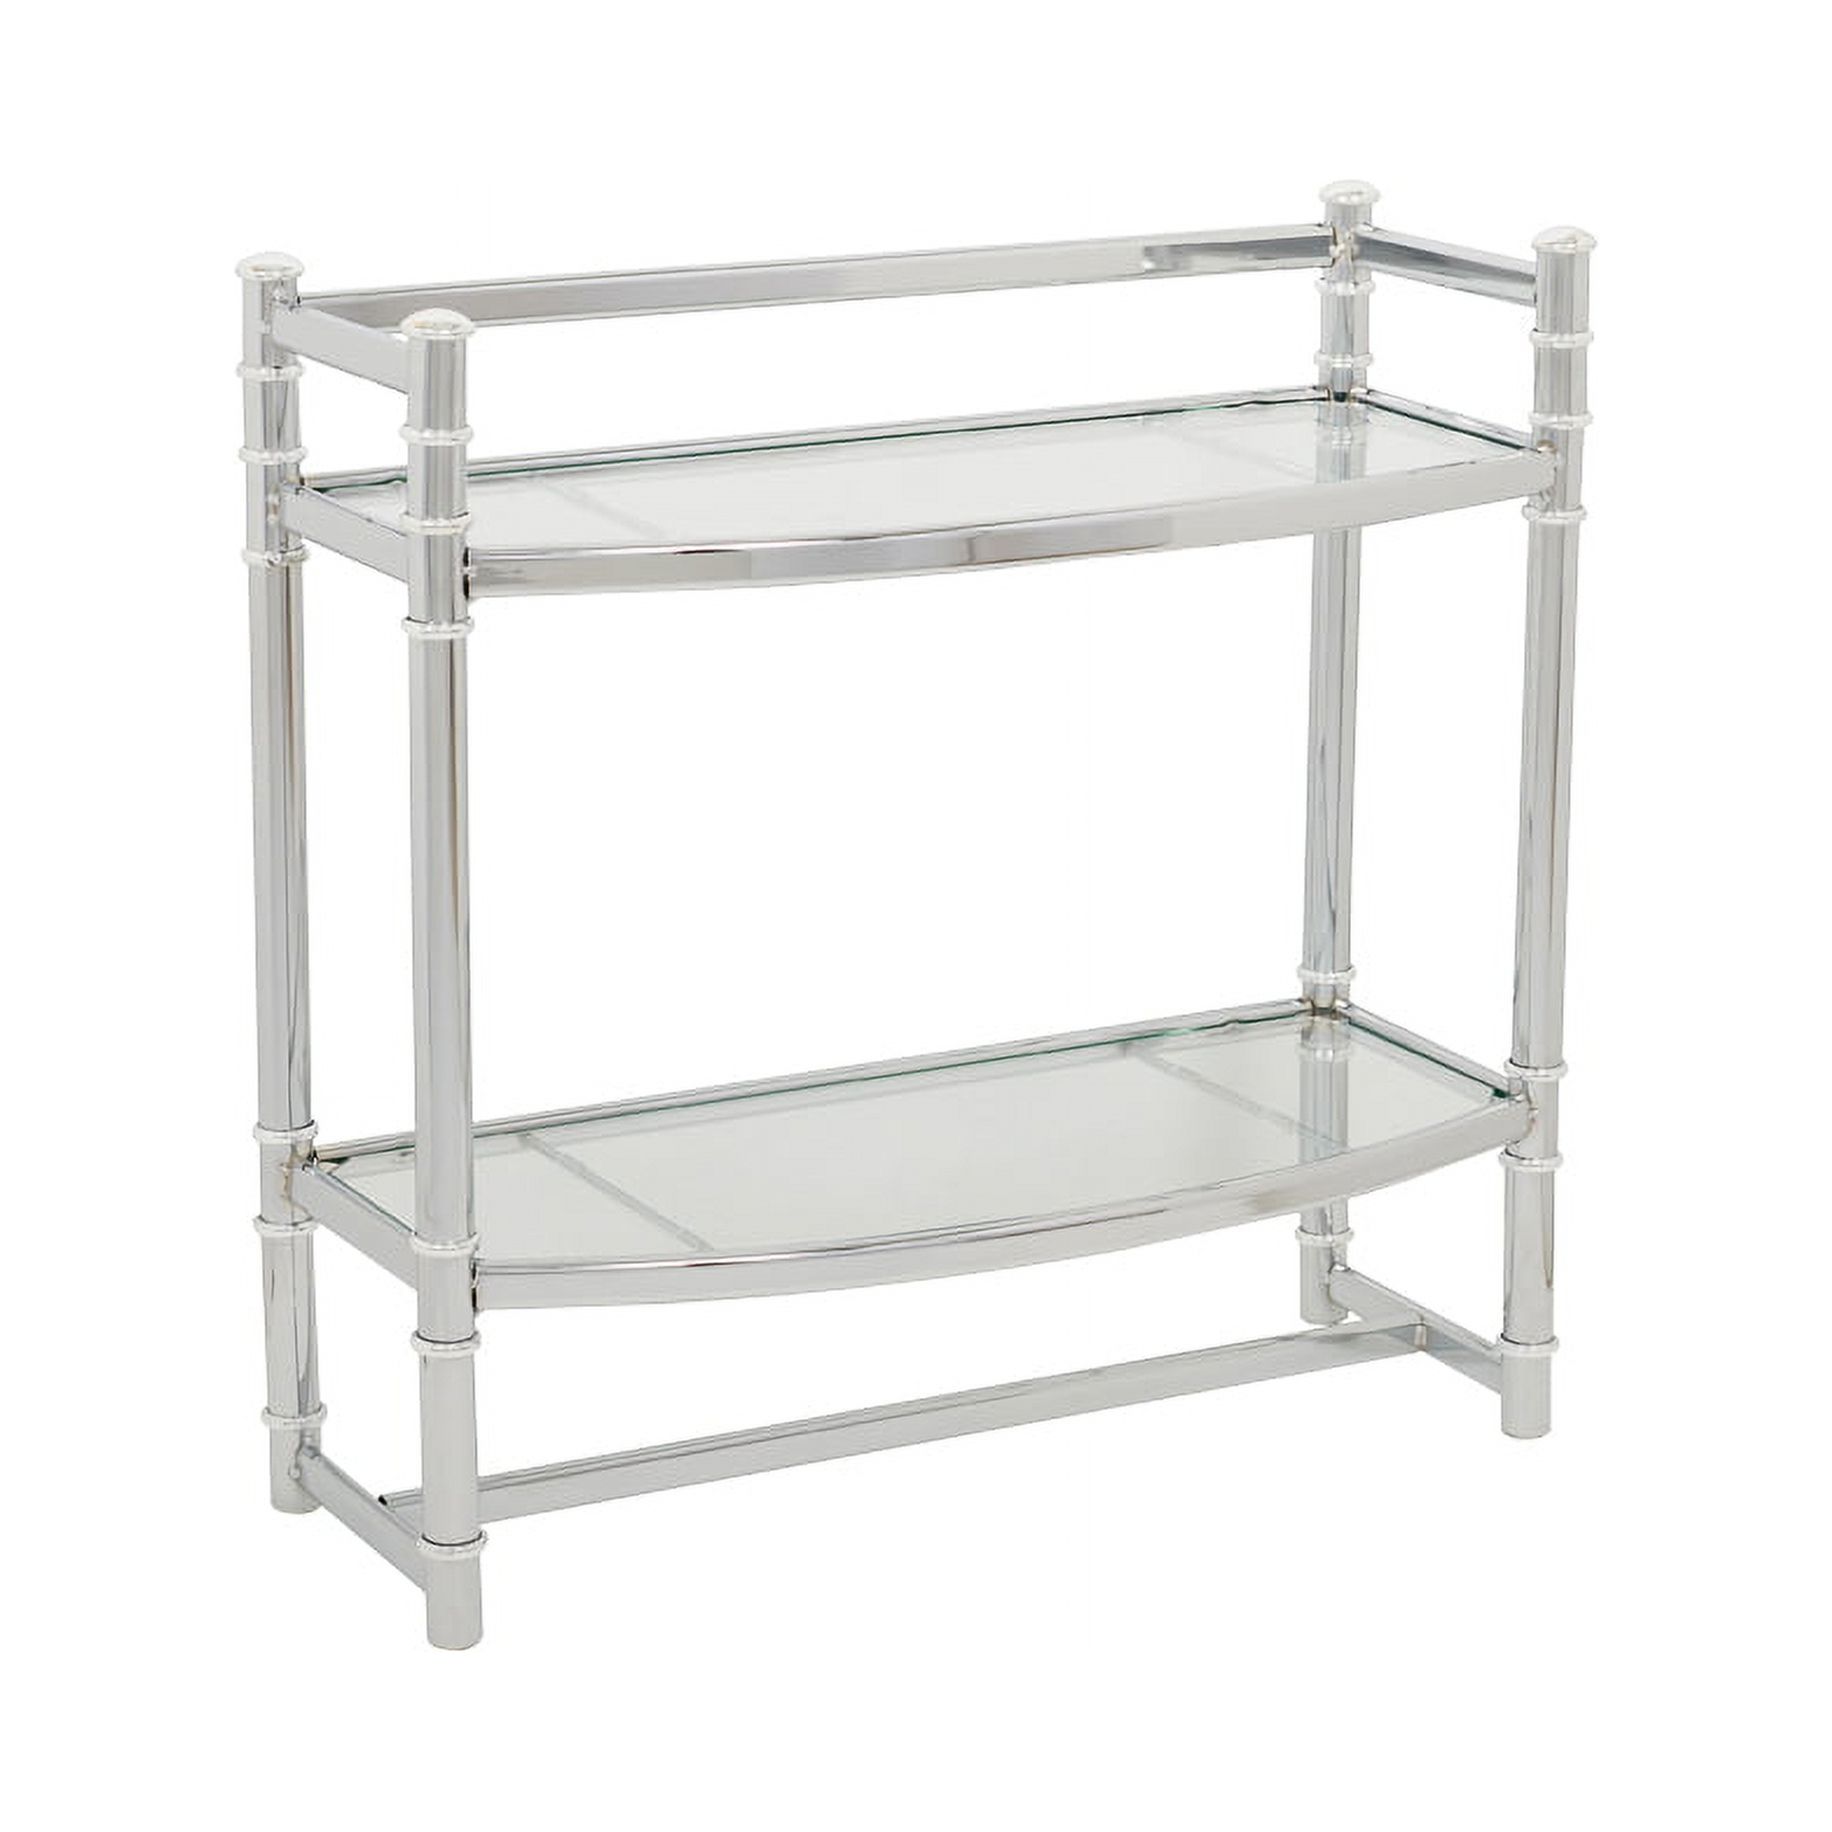 Zenna Home Wall Shelf, in Chrome, with Tempered Glass Shelves - image 1 of 2